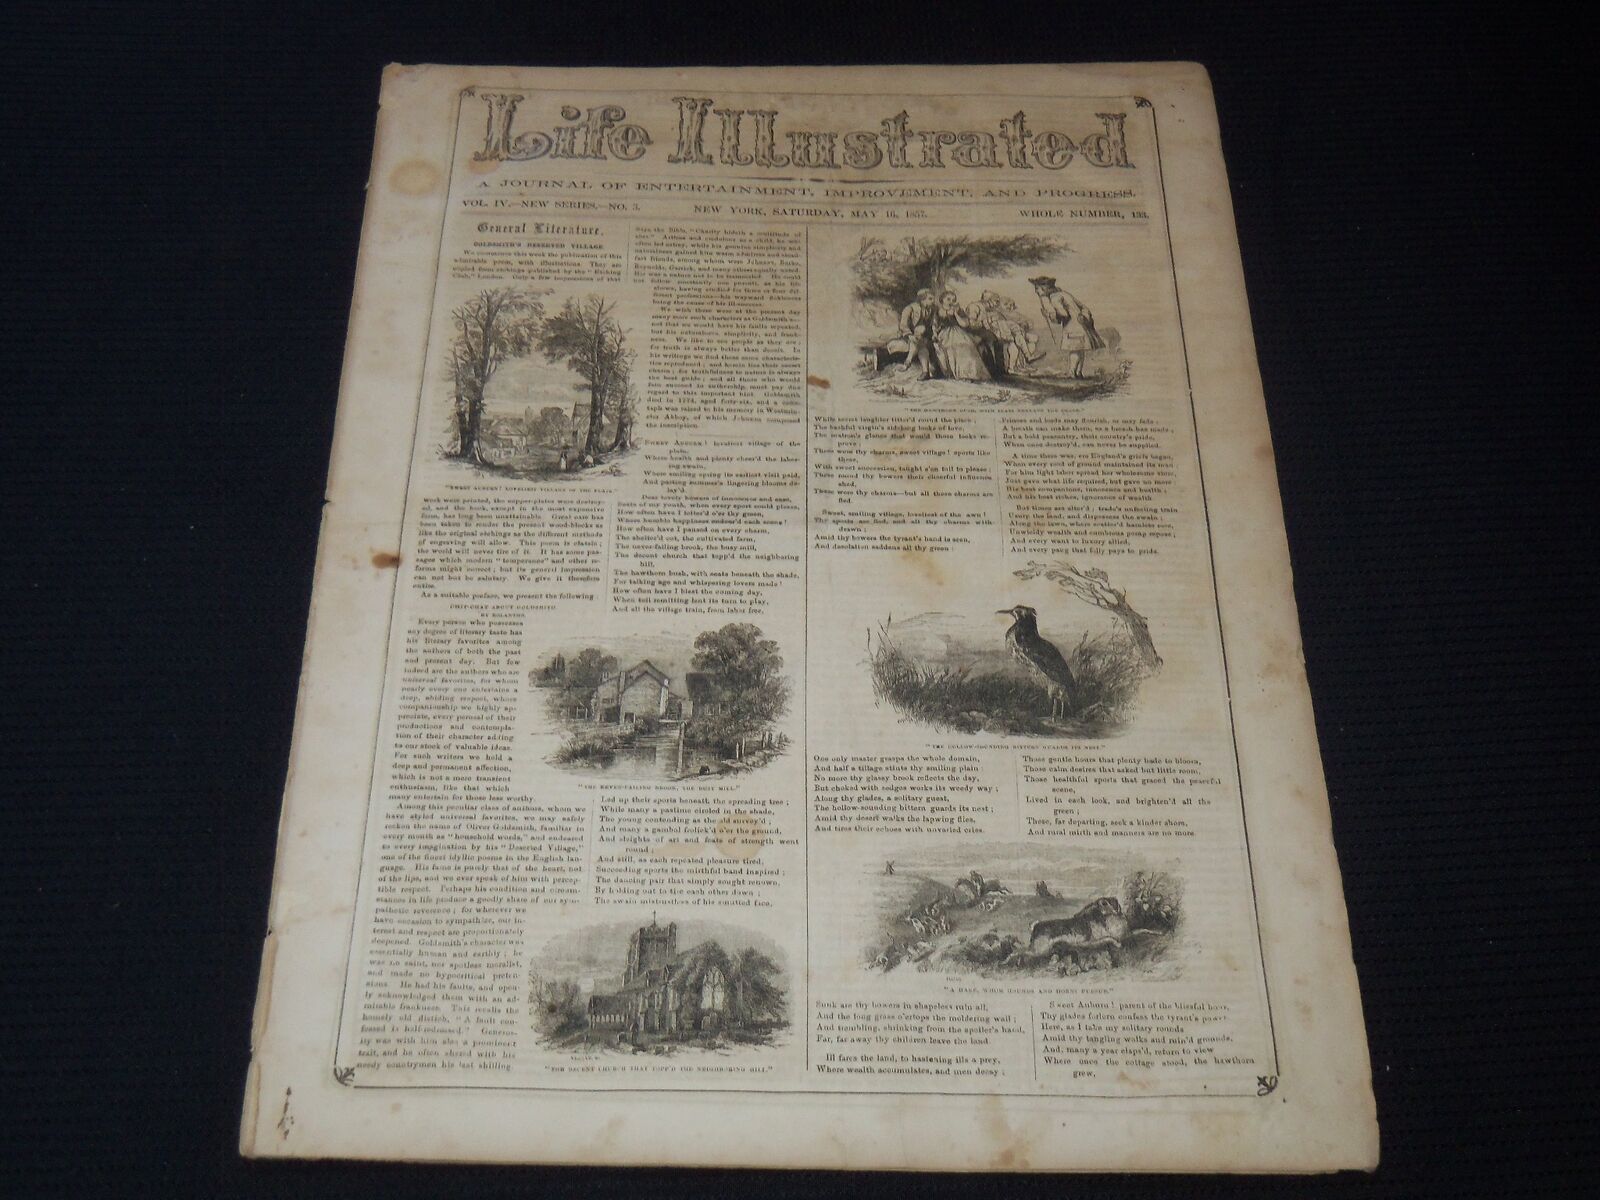 1857 MAY 16 LIFE ILLUSTRATED NEWSPAPER - J. D. SARVEN'S WOOD MACHINE - NP 5923